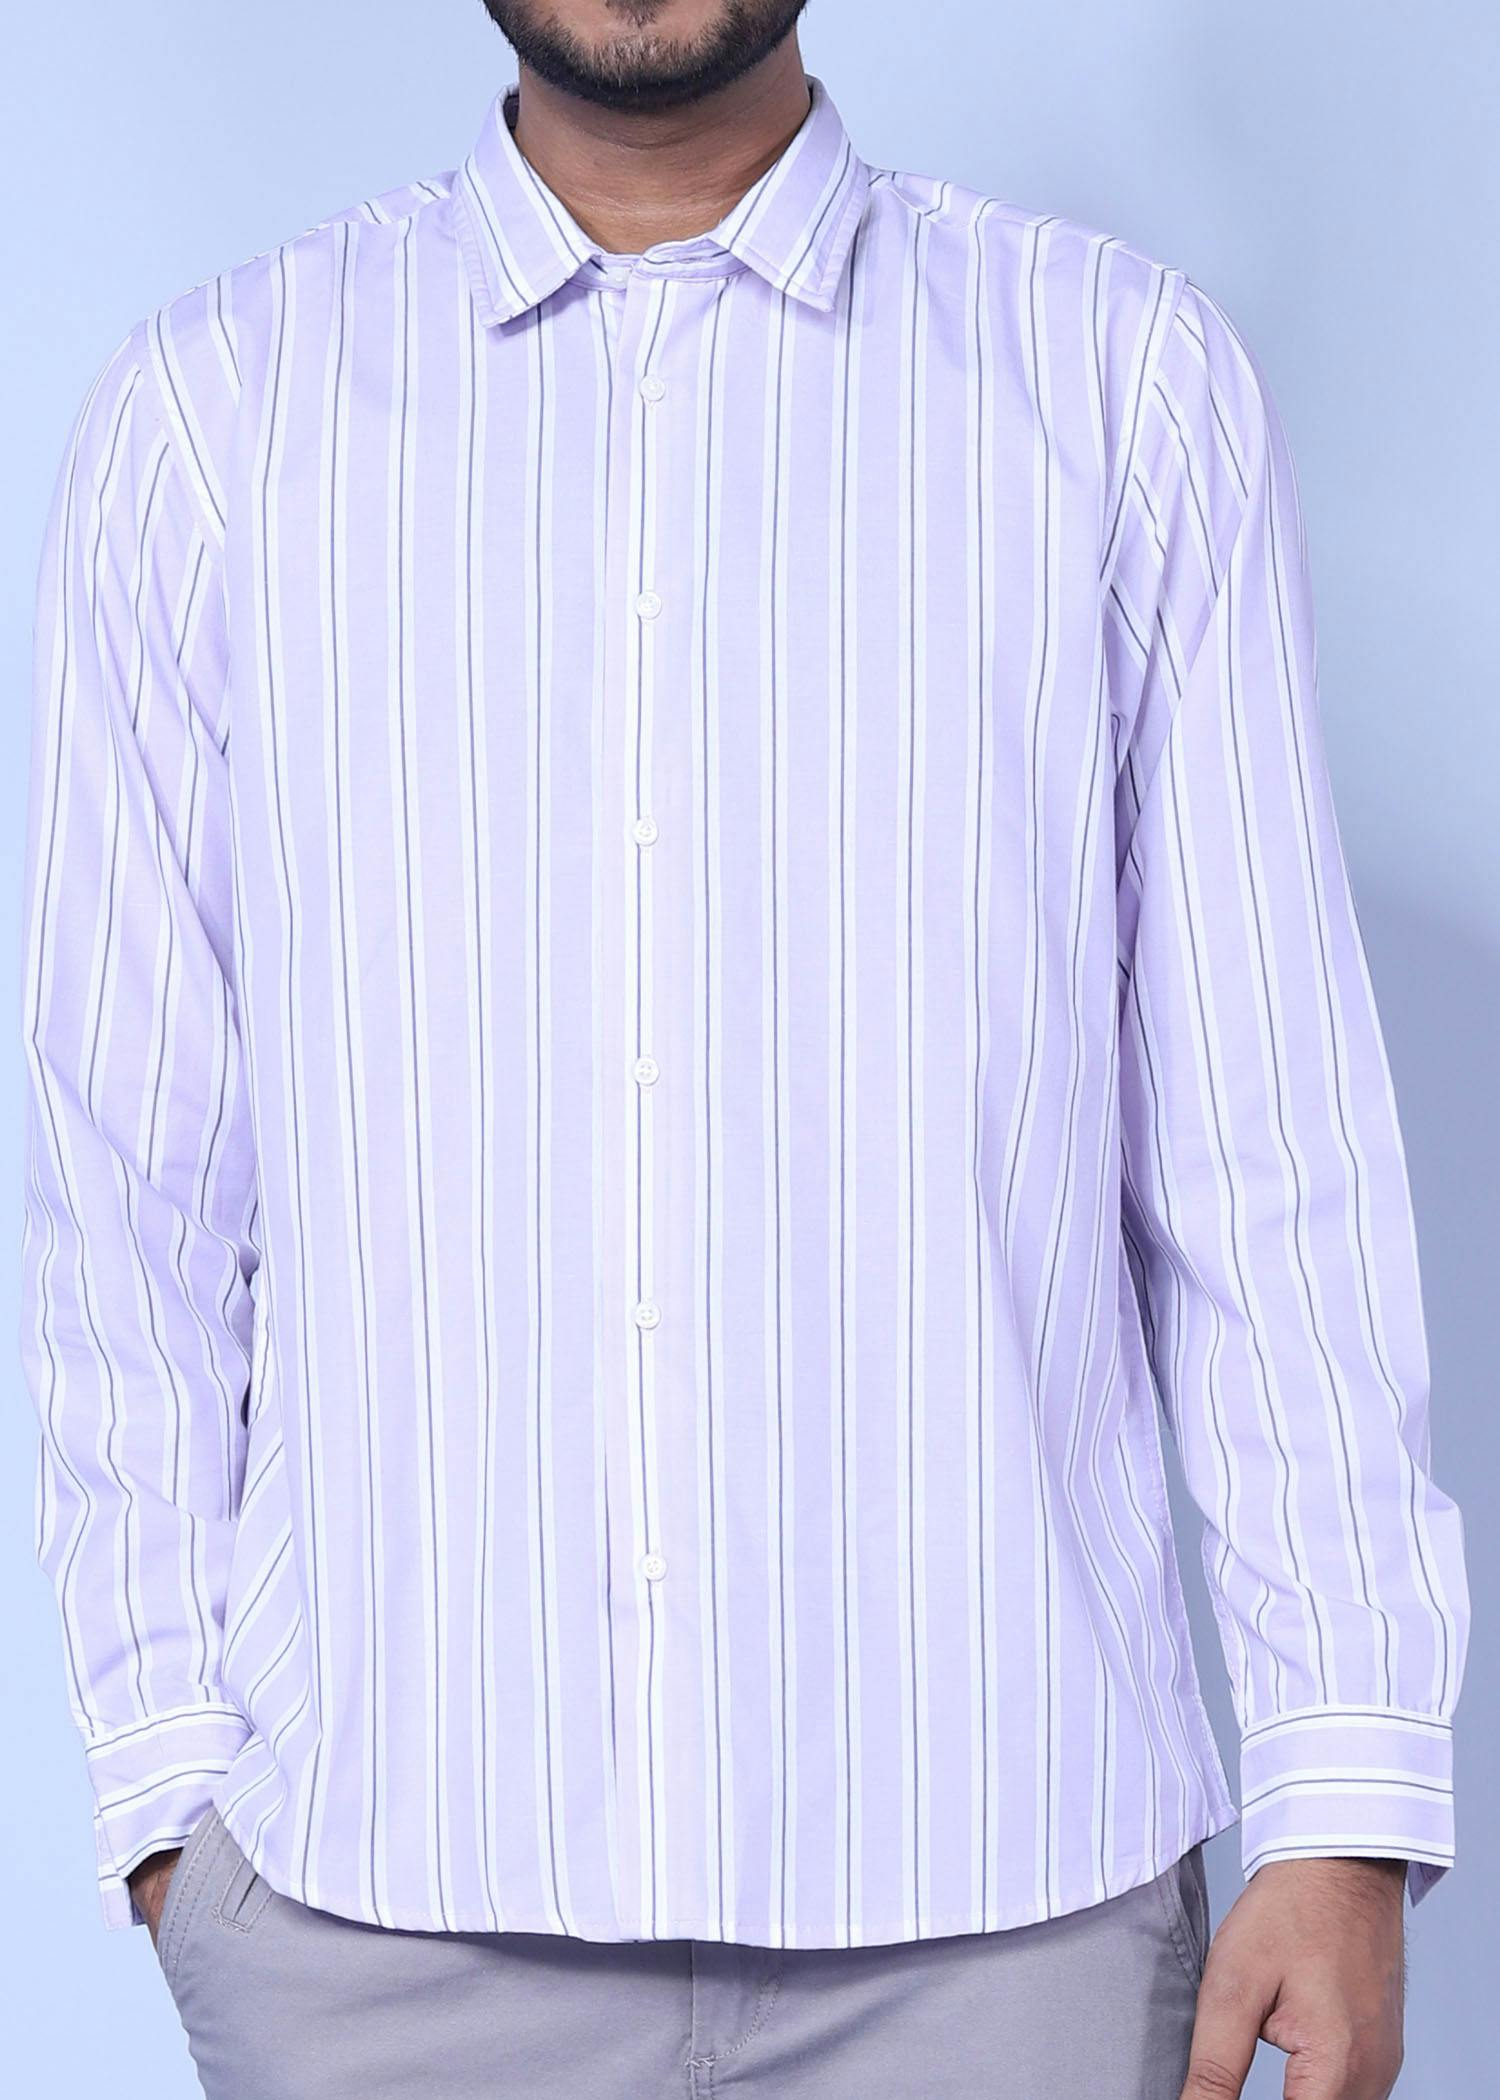 istanbul xxiii fs shirt lt purple color facecropped